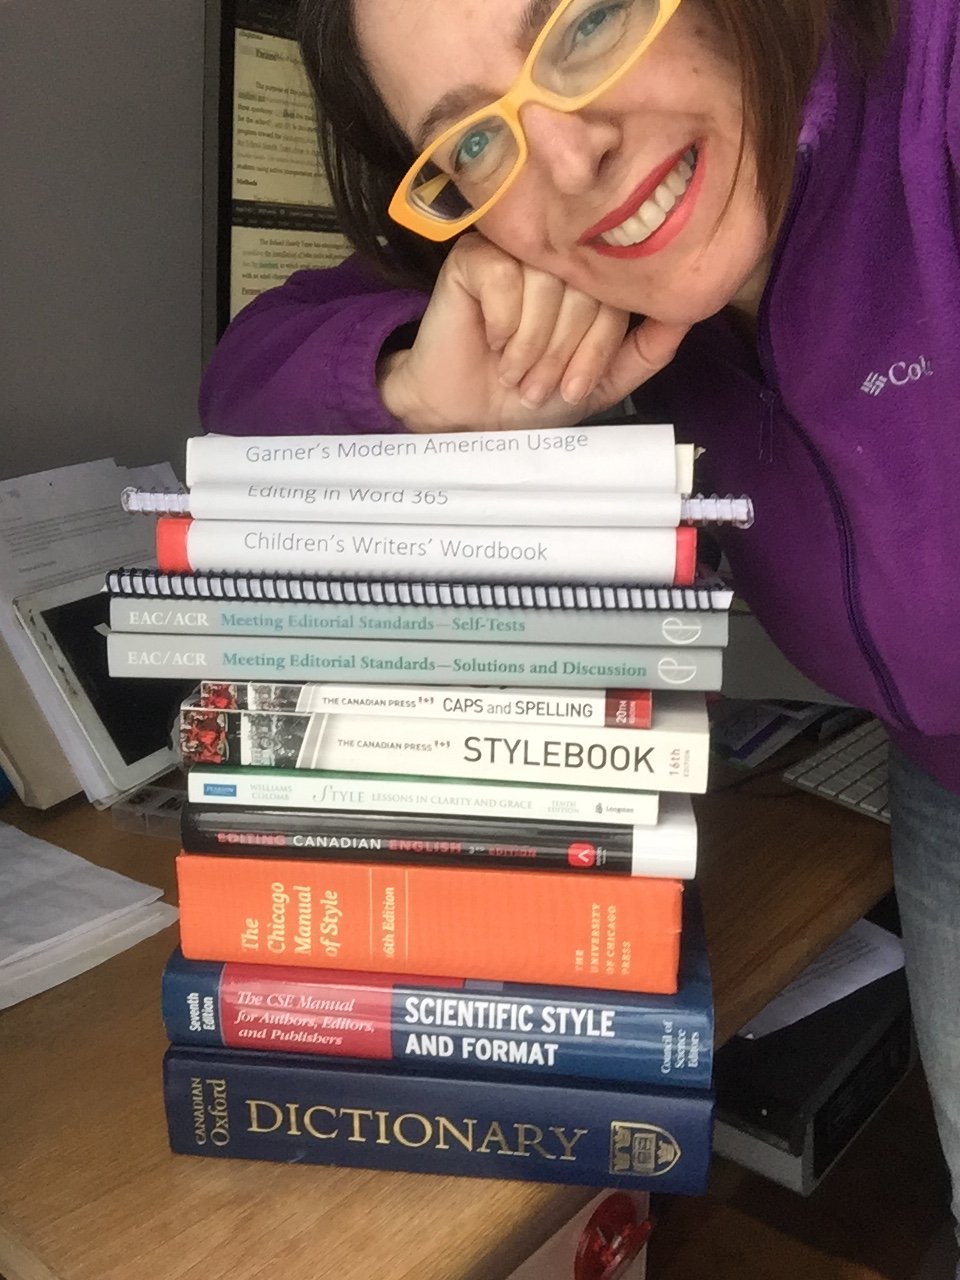 Selfie with pile of books I refer to just about daily for editing: Modern American Usage, Chicago Manual of Style, Scientific Style and format, Canadian Oxford Dictionary, Canadian Press Style plus their Caps and Spelling, Meeting Professional Editorial Standards (now Edit like a pro), Children's writers word book, Editing in Word 365